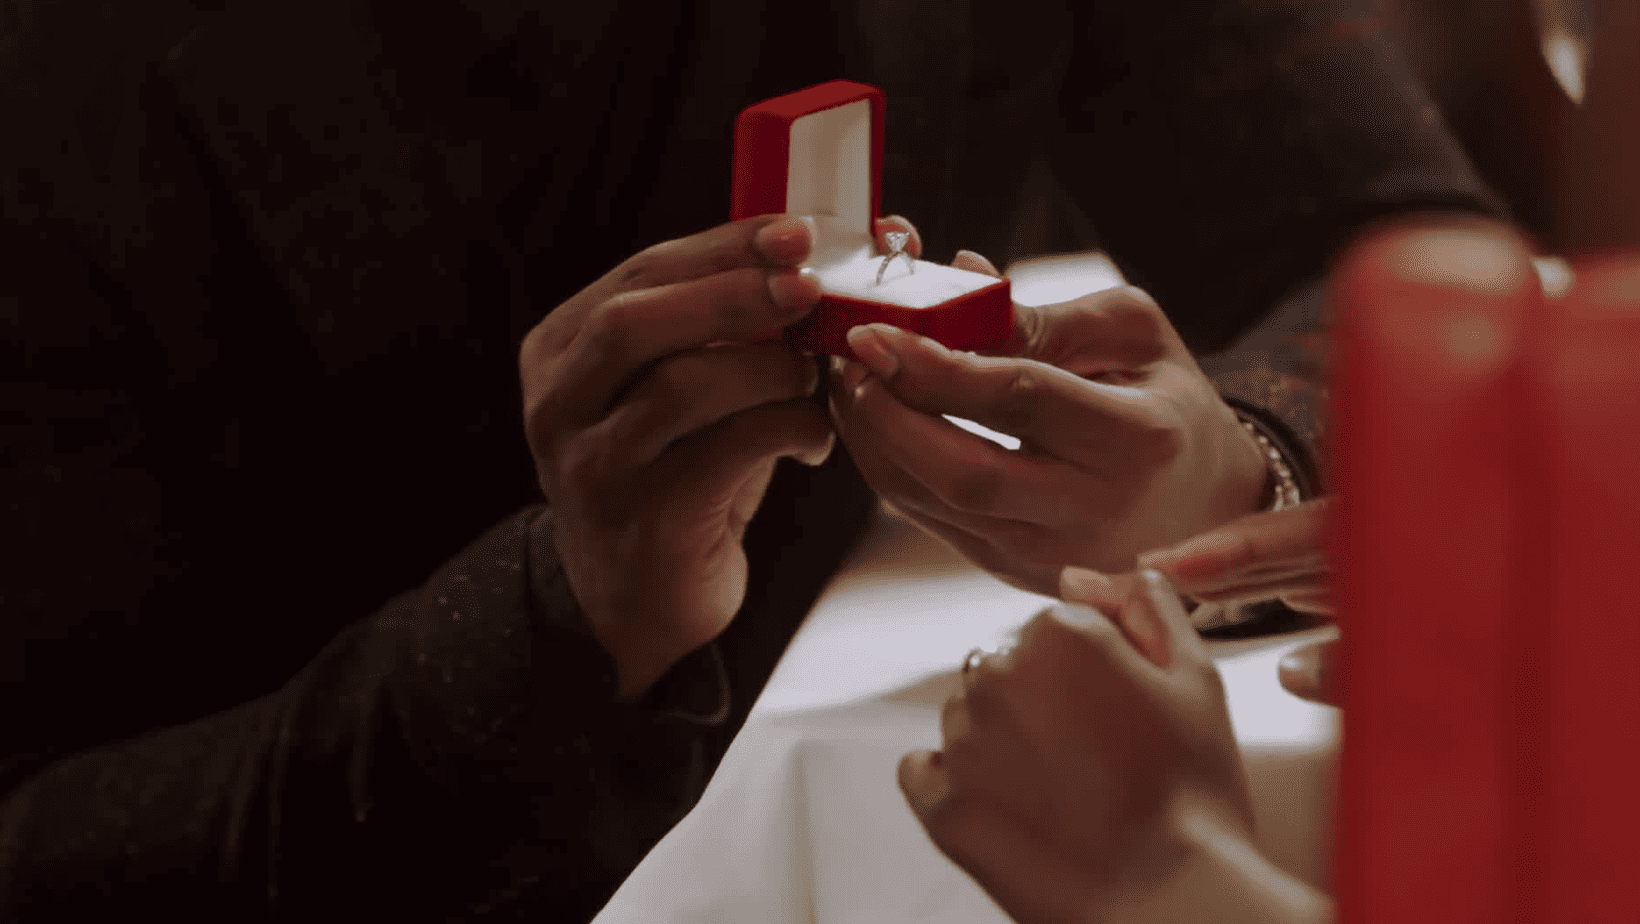 A man’s hand holds an open engagement ring box in this image from Fuqua Films.